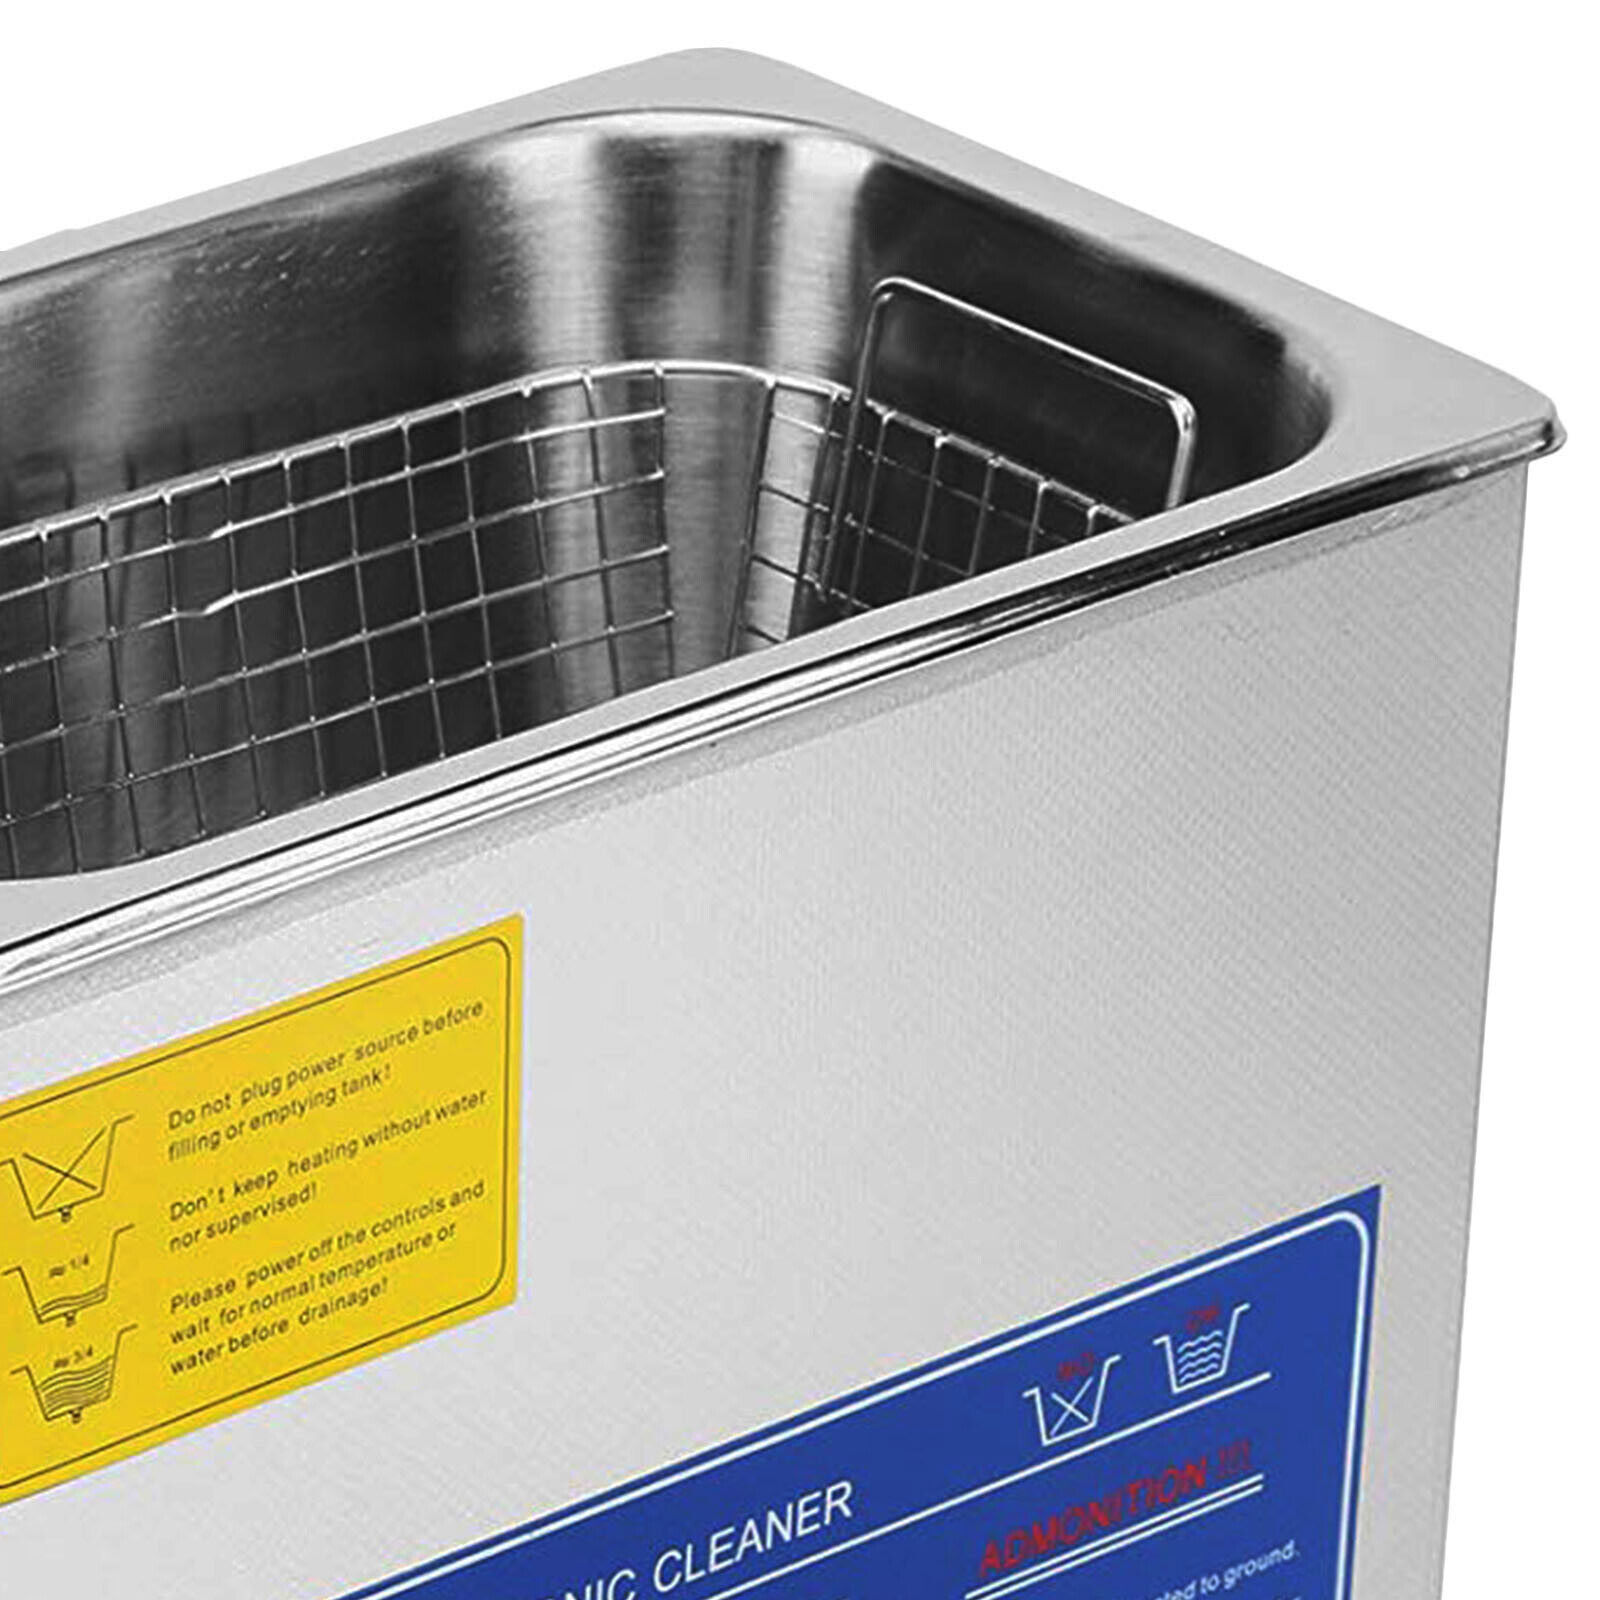 3L Ultrasonic Cleaner with Heater & Digital Timer